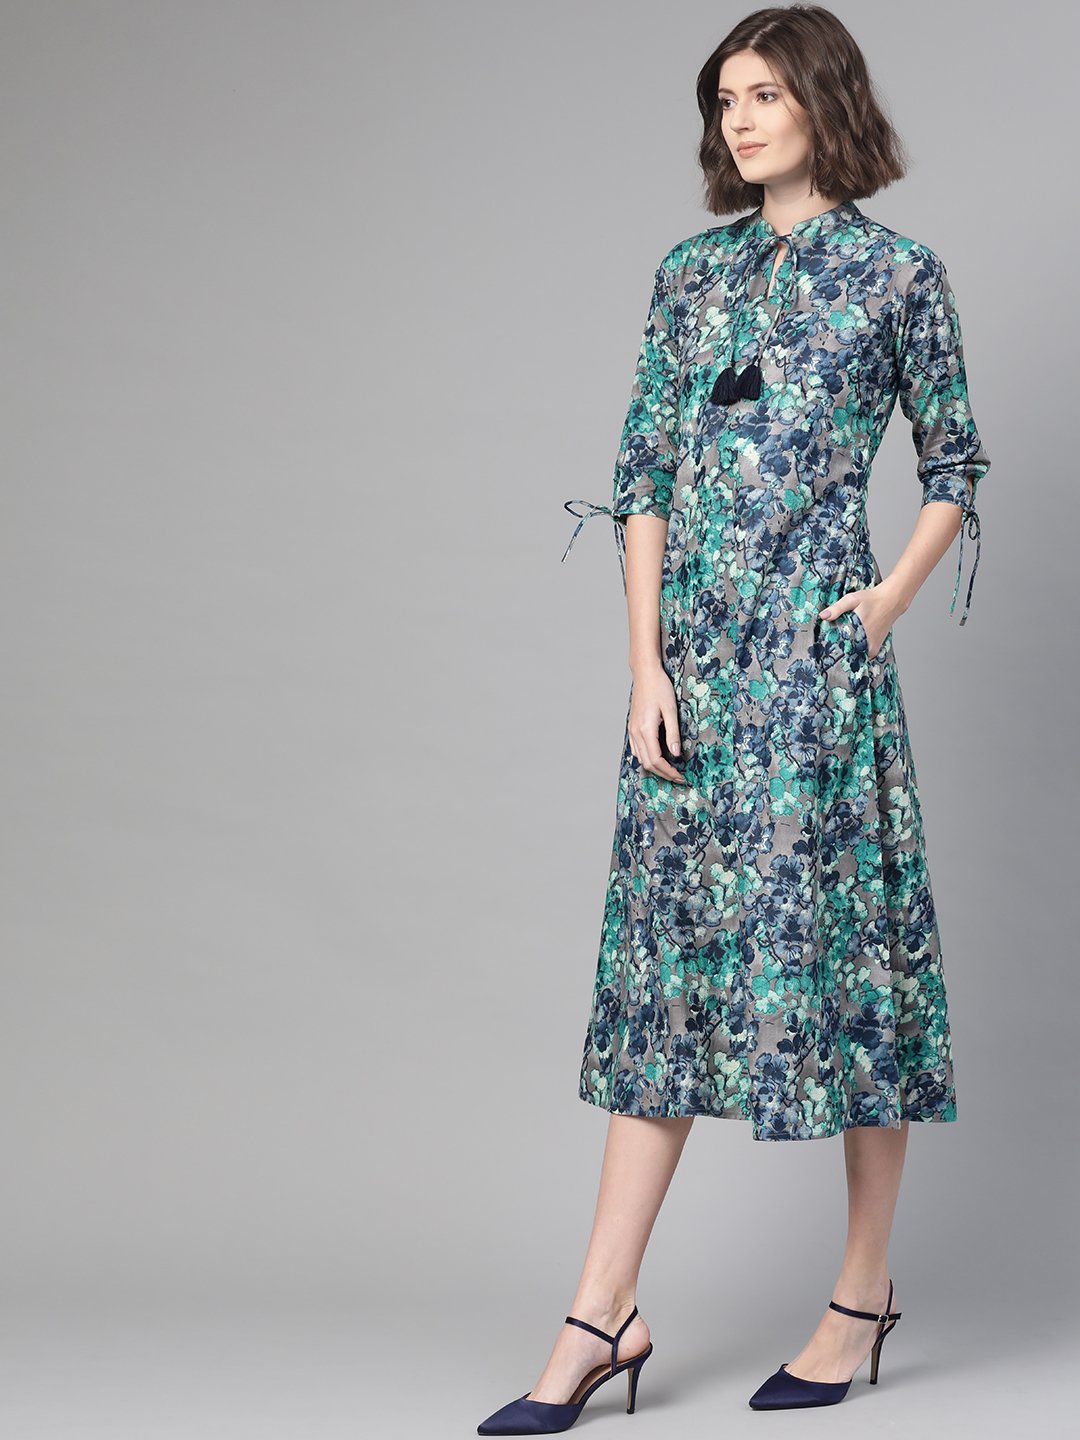 Women's Nayo Grey & Navy Blue Floral Printed A-Line Dress - Nayo Clothing